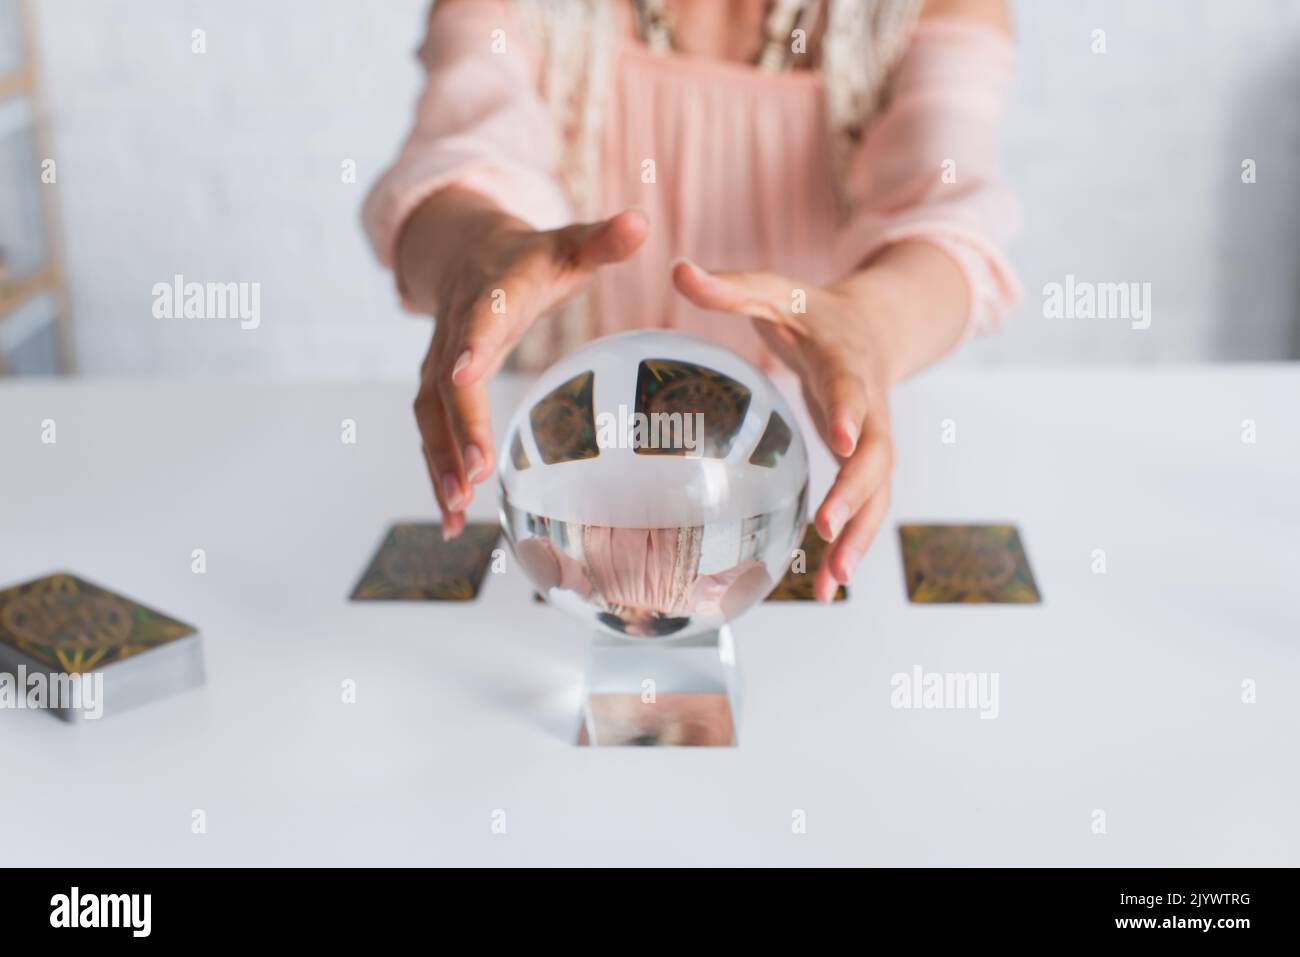 KYIV, UKRAINE - JUNE 29, 2022: selective focus of crystal ball near cropped fortune teller on blurred background Stock Photo